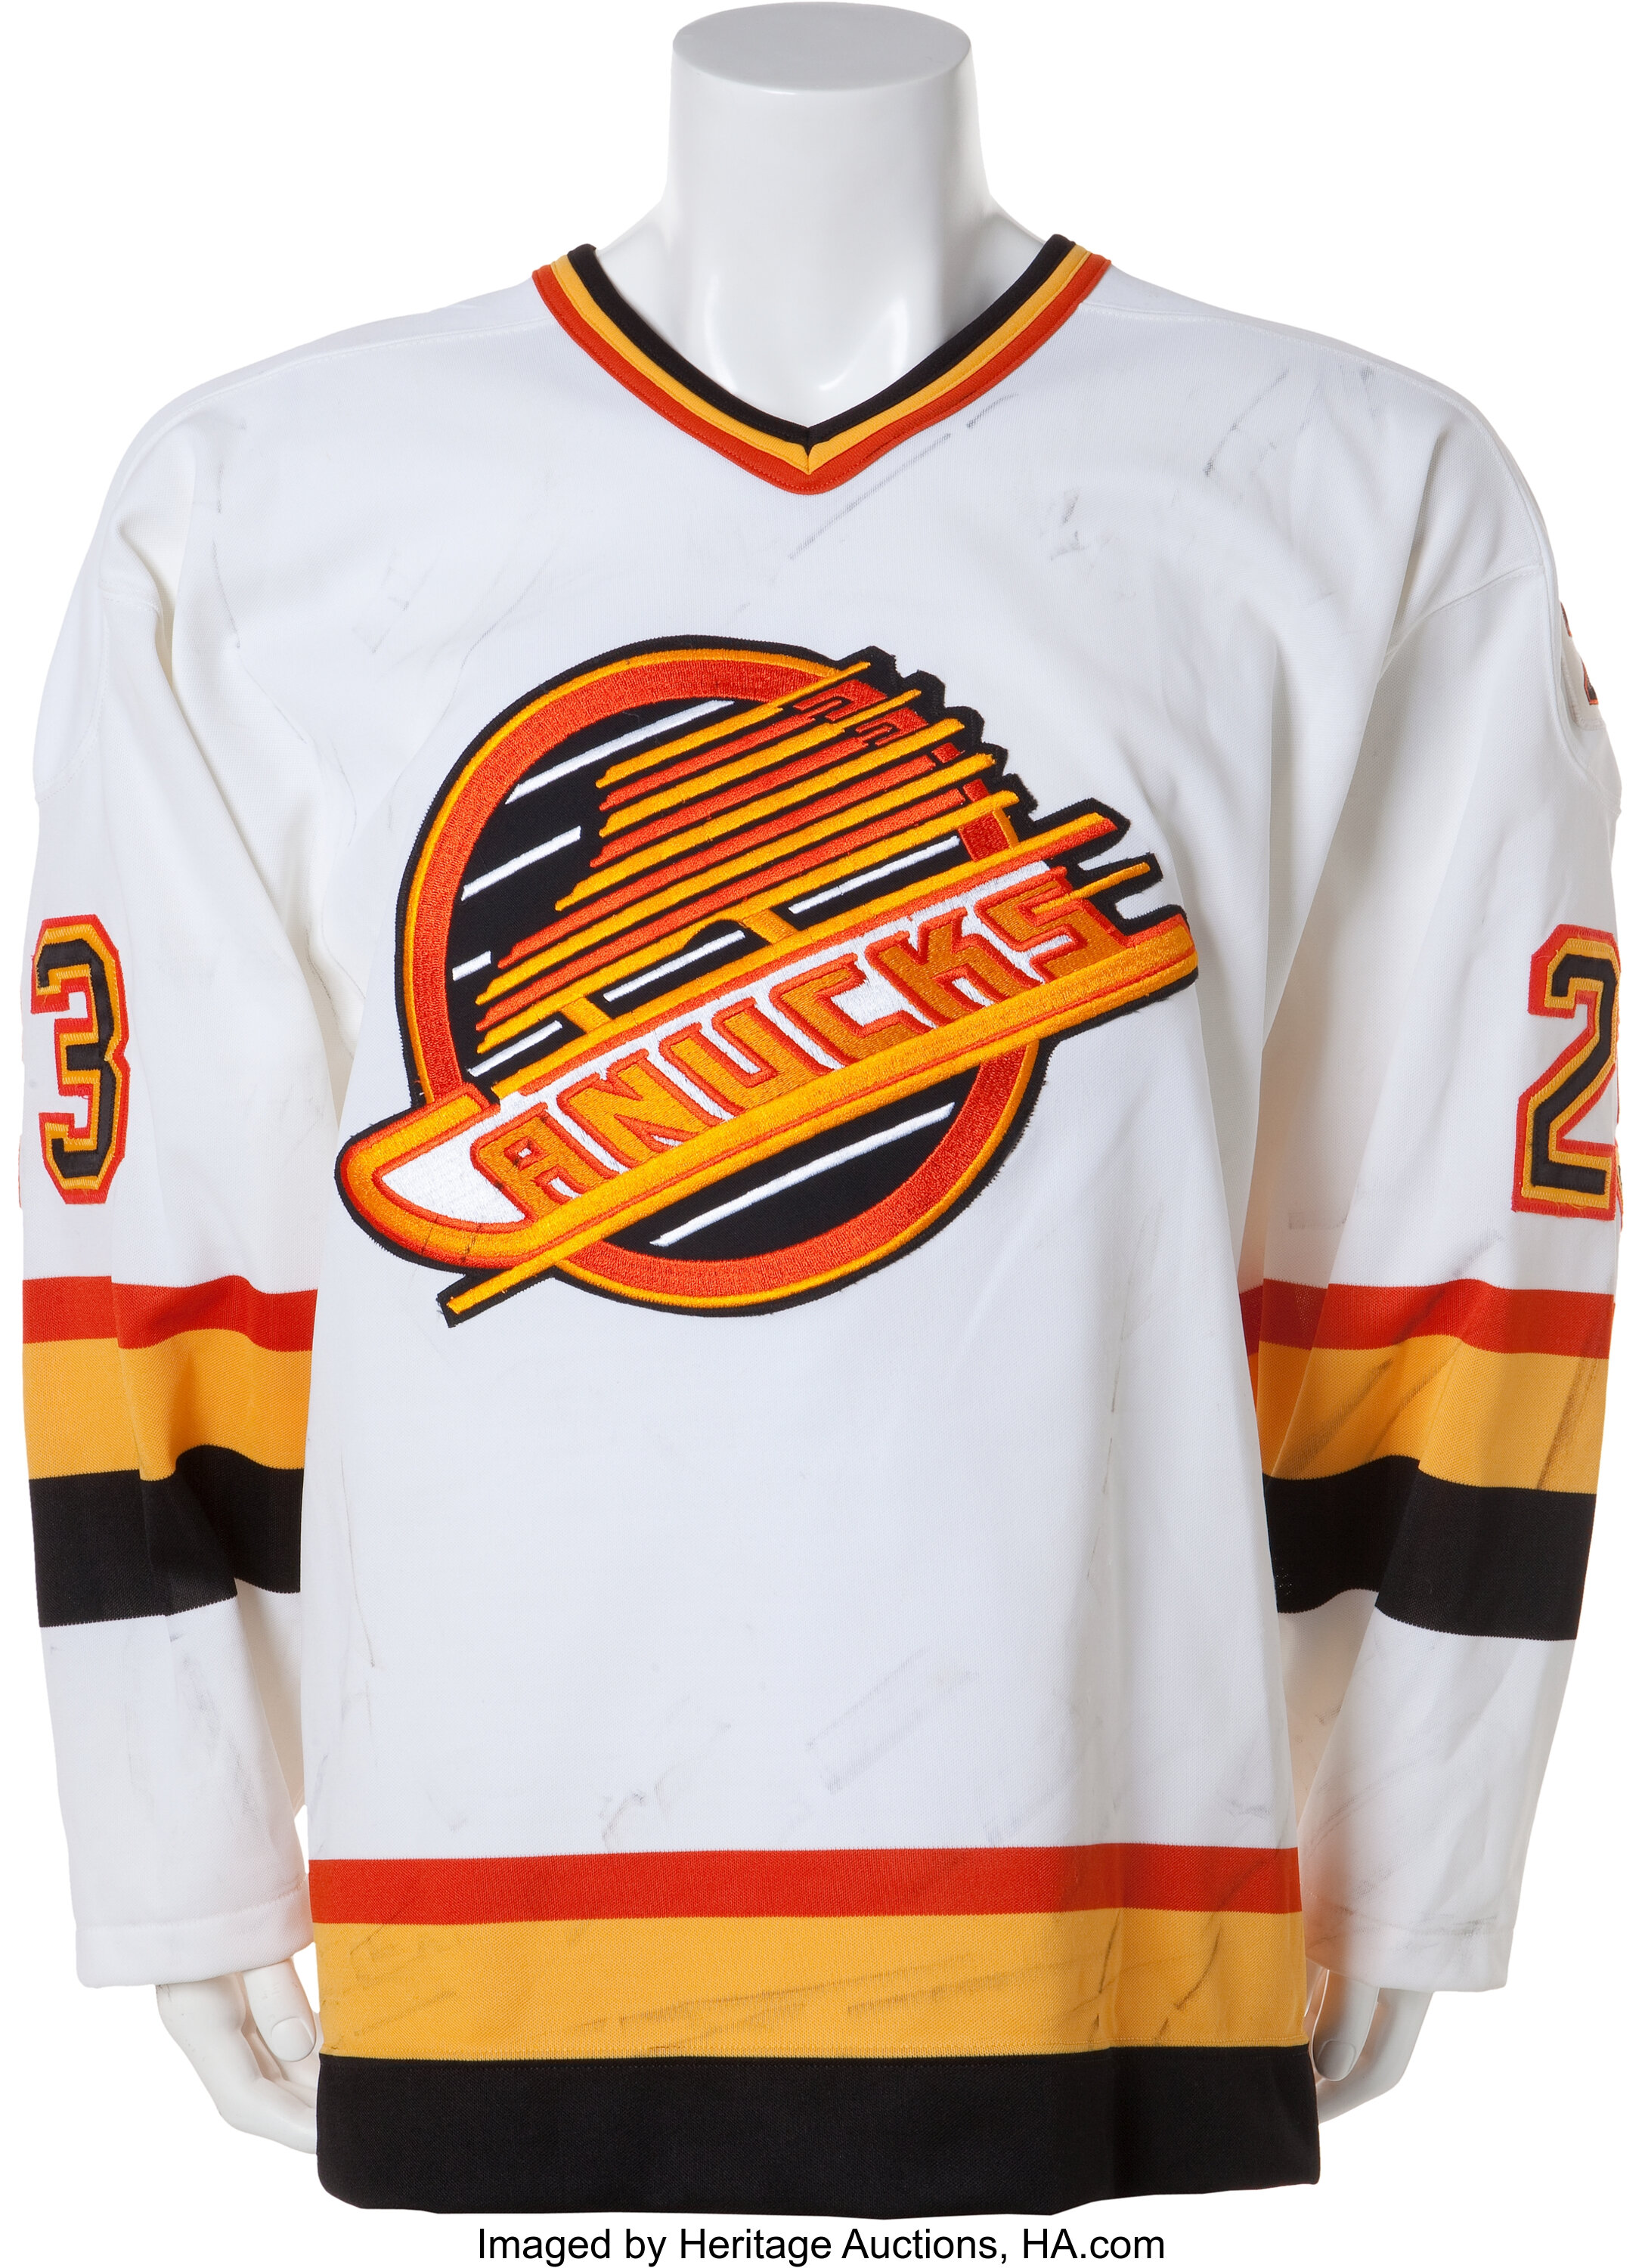 Vancouver Canucks Archive - Gameworn Hockey Jersey Collection